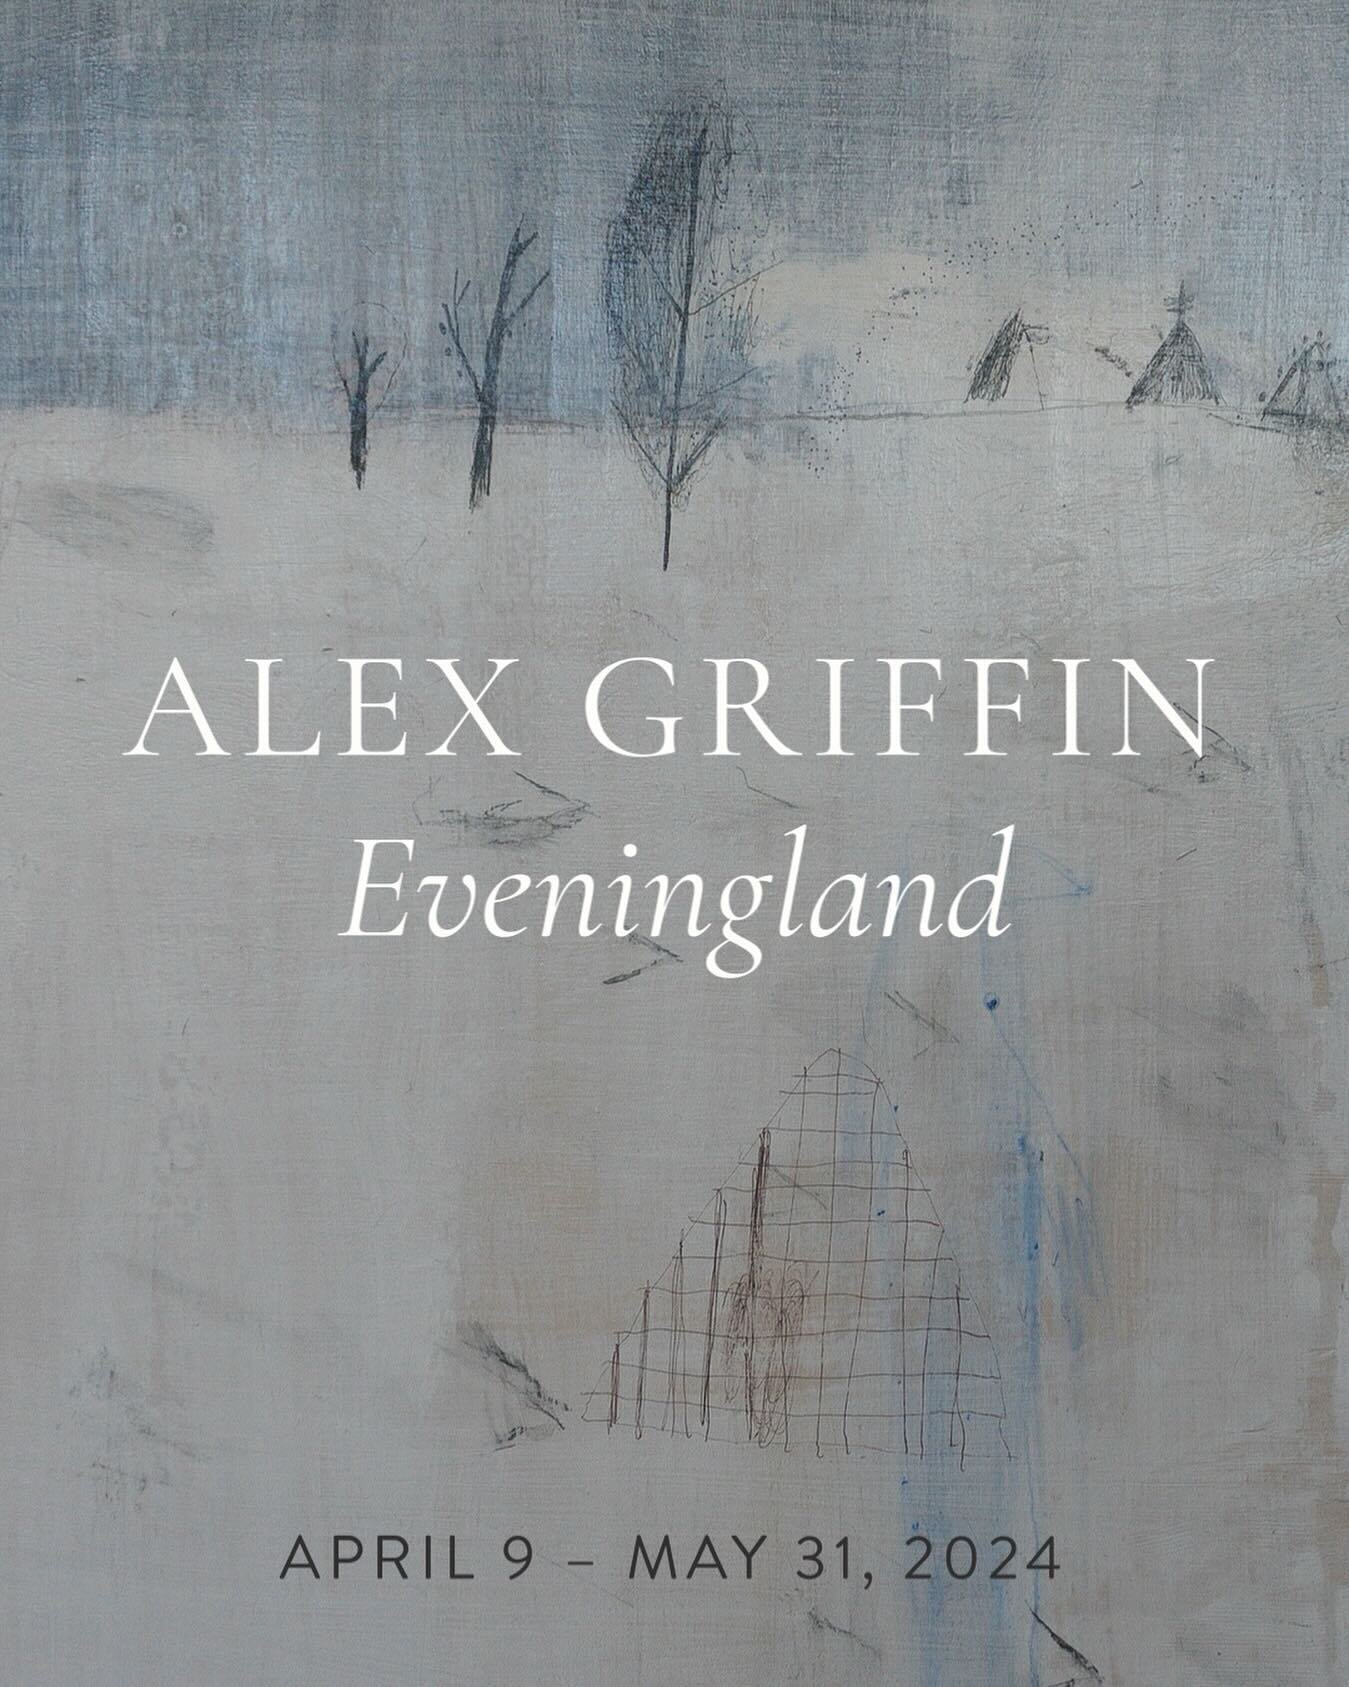 ✨Opening Next Week!✨

Nancy Margolis Gallery is excited to unveil its third solo exhibition of works by Philadelphia artist Alex Griffin:

𝐀𝐋𝐄𝐗 𝐆𝐑𝐈𝐅𝐅𝐈𝐍 &bull; 𝑬𝒗𝒆𝒏𝒊𝒏𝒈𝒍𝒂𝒏𝒅
𝐀𝐩𝐫𝐢𝐥 𝟗 &ndash; 𝐌𝐚𝐲 𝟑𝟏

The show will be prese